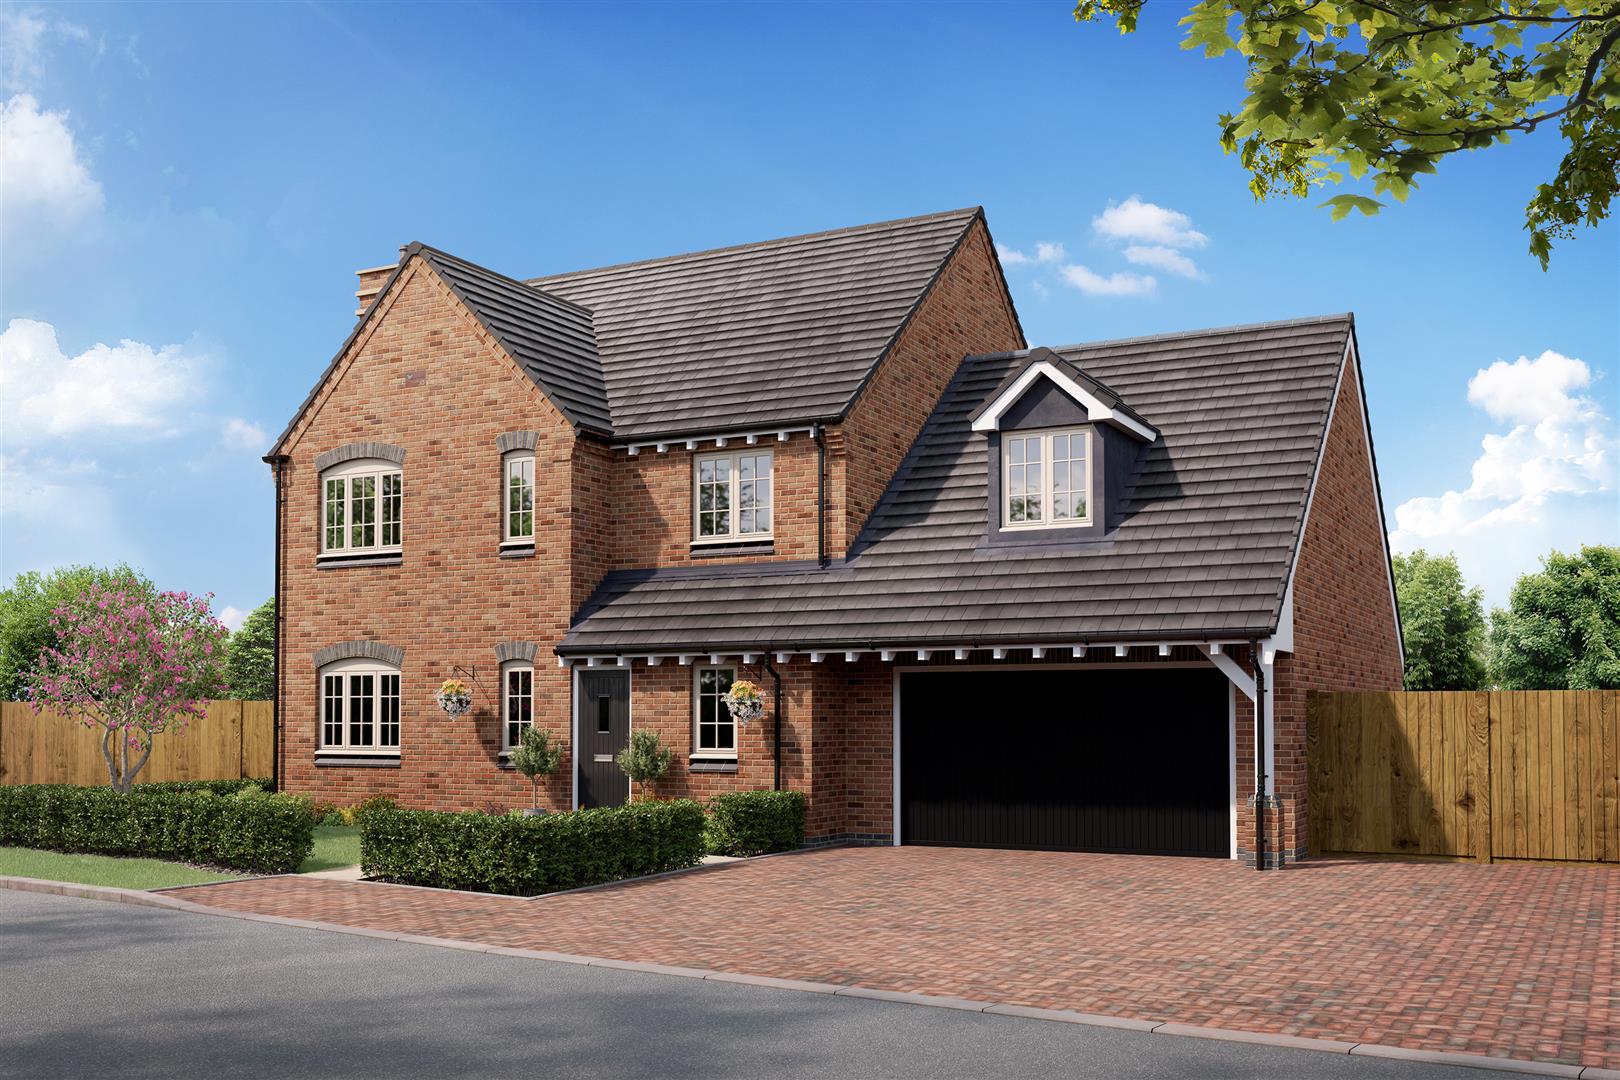 Atherstone, Staffordshire, 5 bedrooms - New Homes Blog